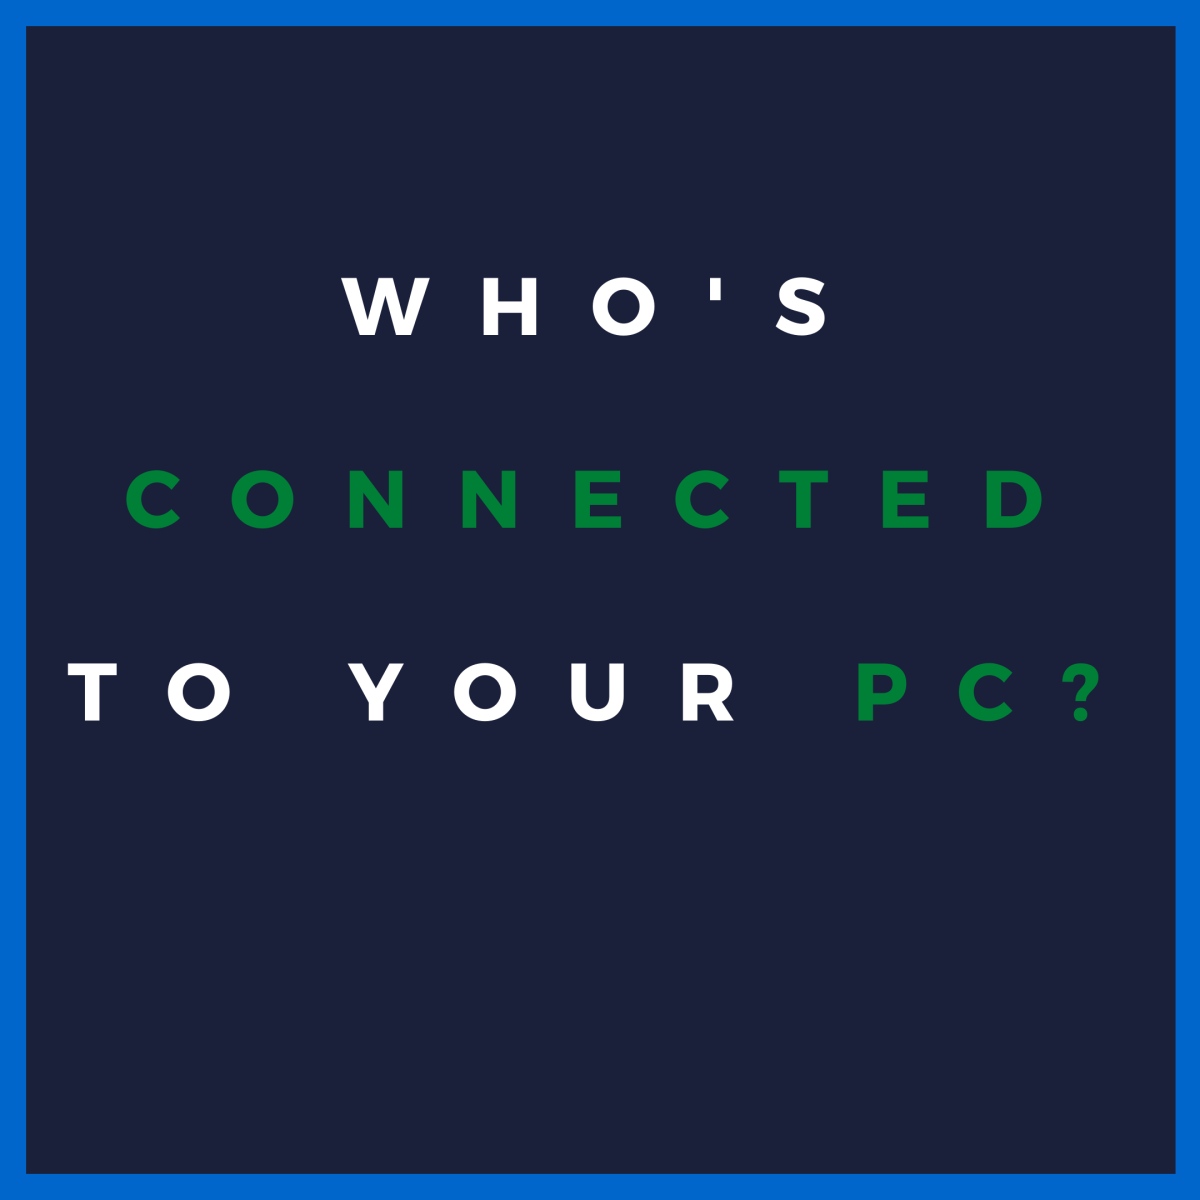 Want to see who's connected to your PC right now? We'll open up the Windows cmd prompt, use Netstat, and then use the "Foreign Address"  info found to take a look at the connections on the other end.